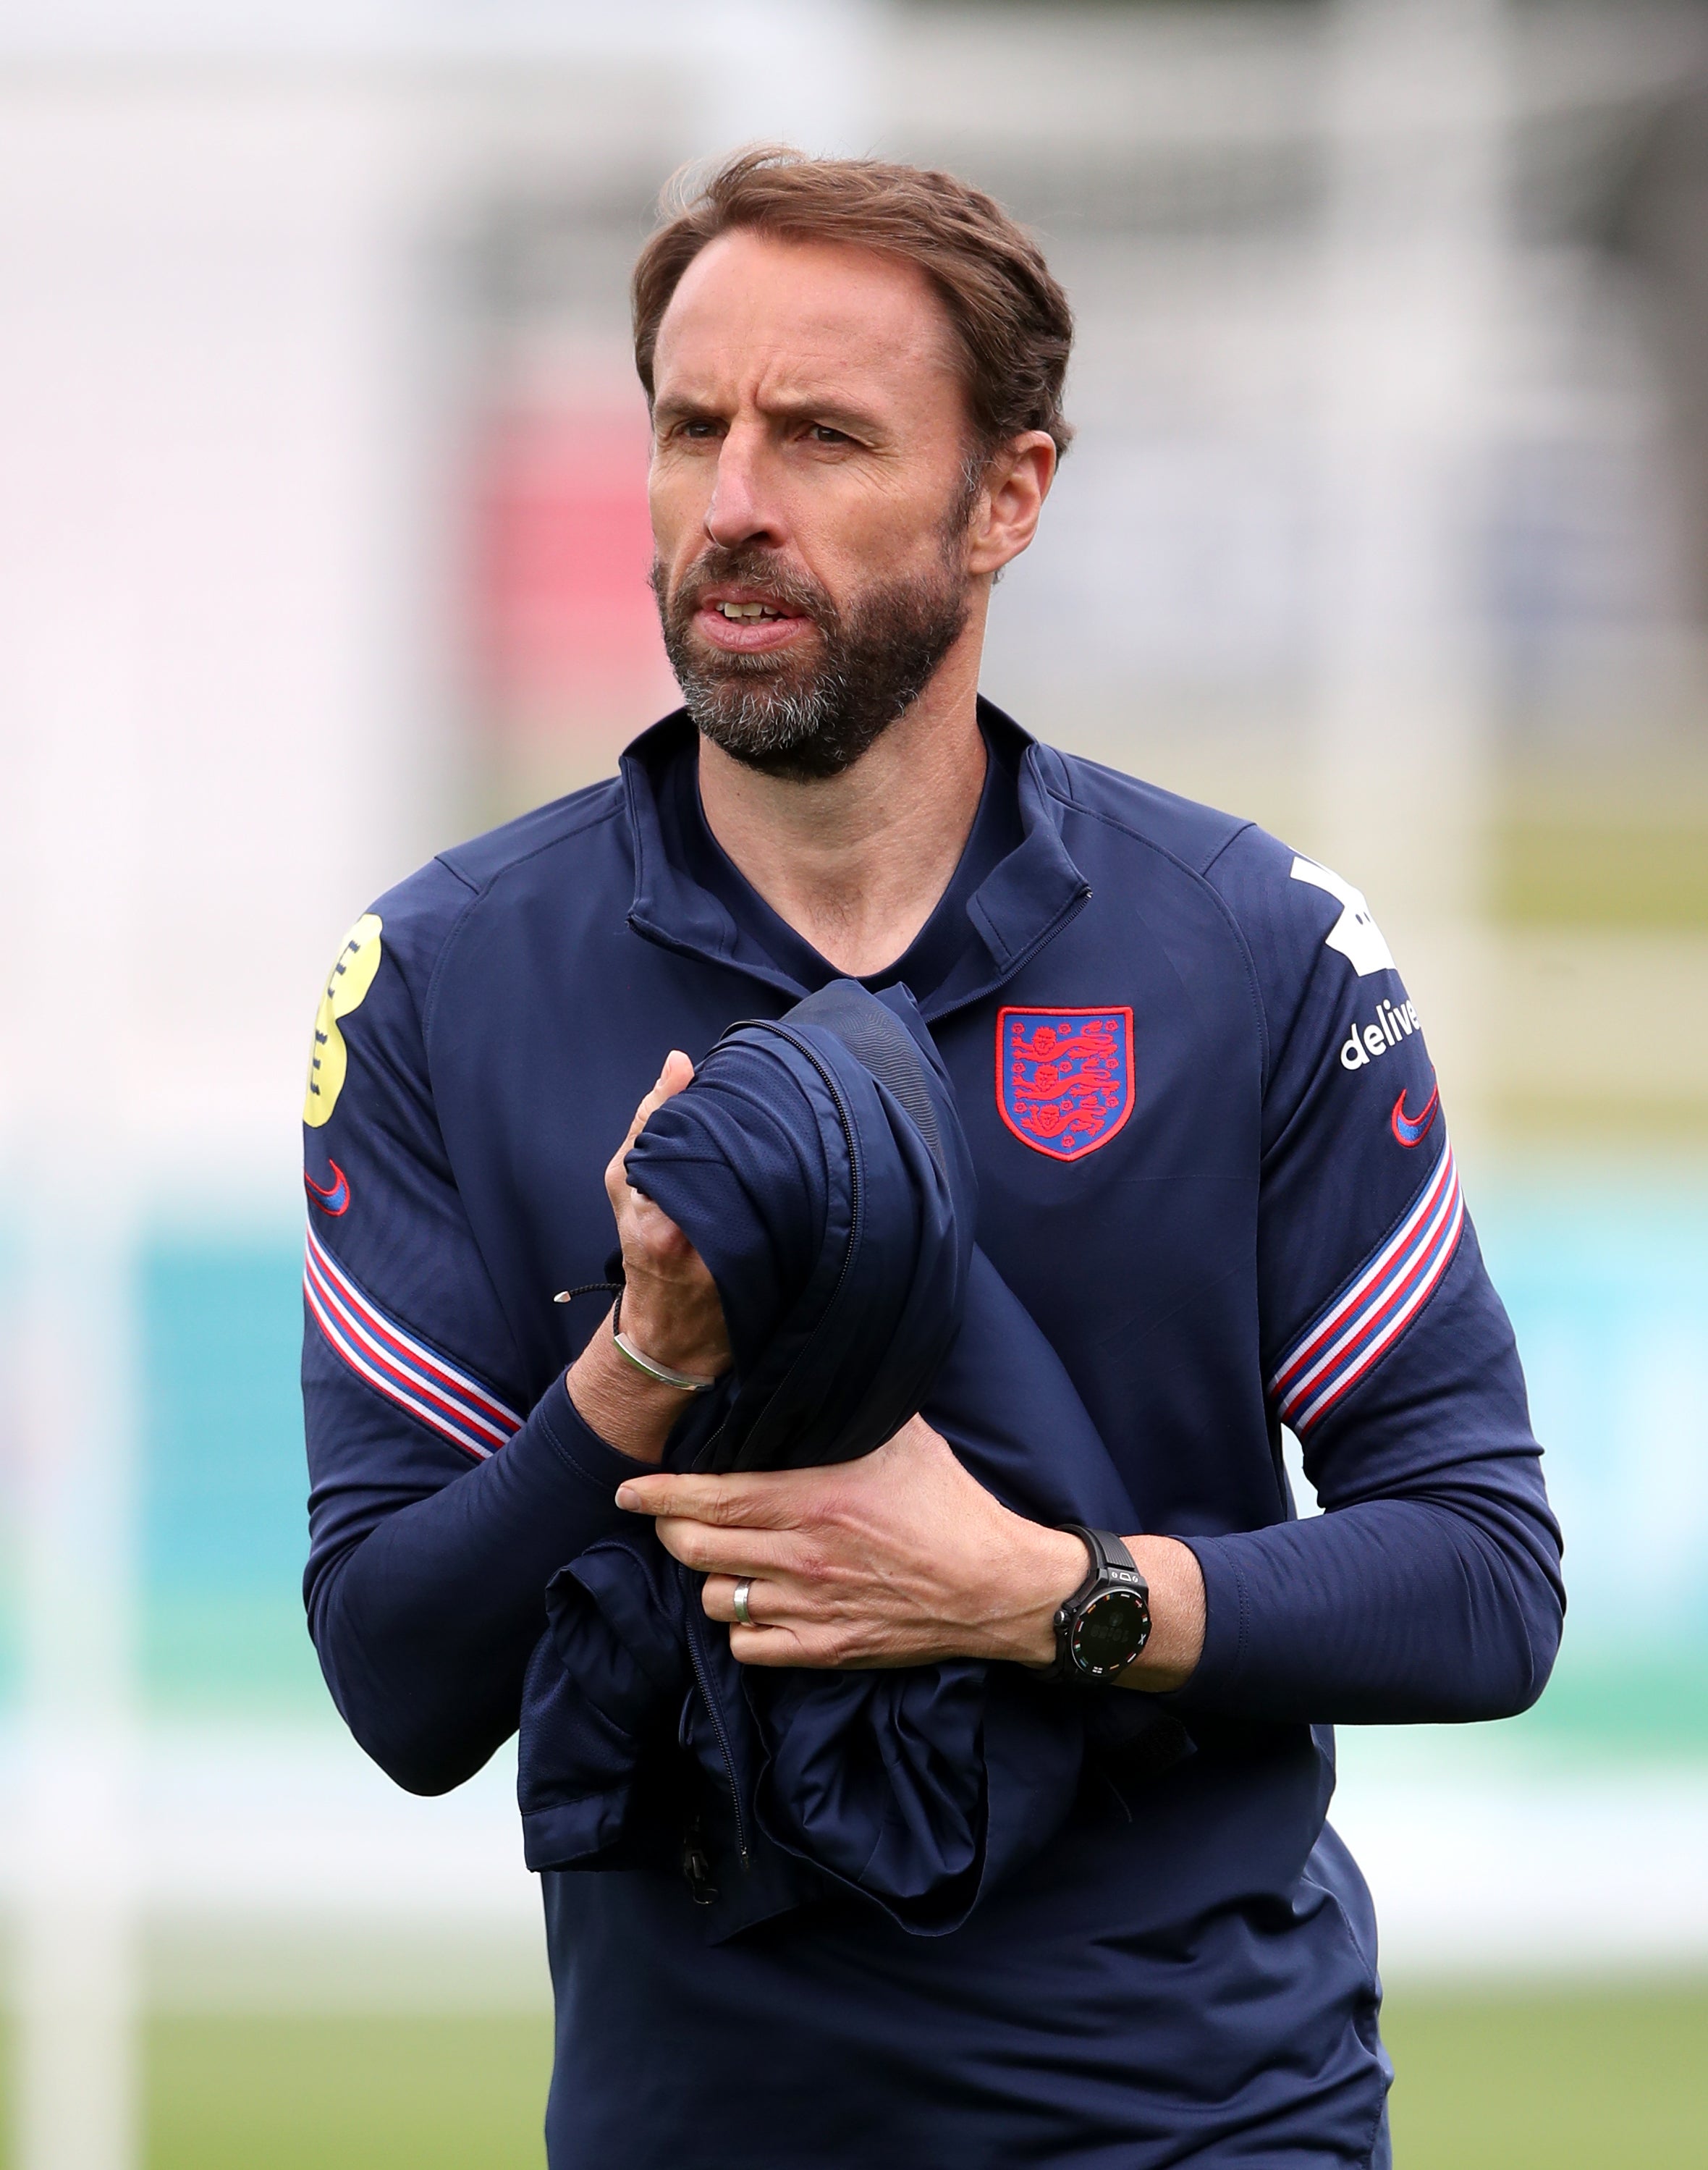 England Training – St George’s Park – Friday June 25th